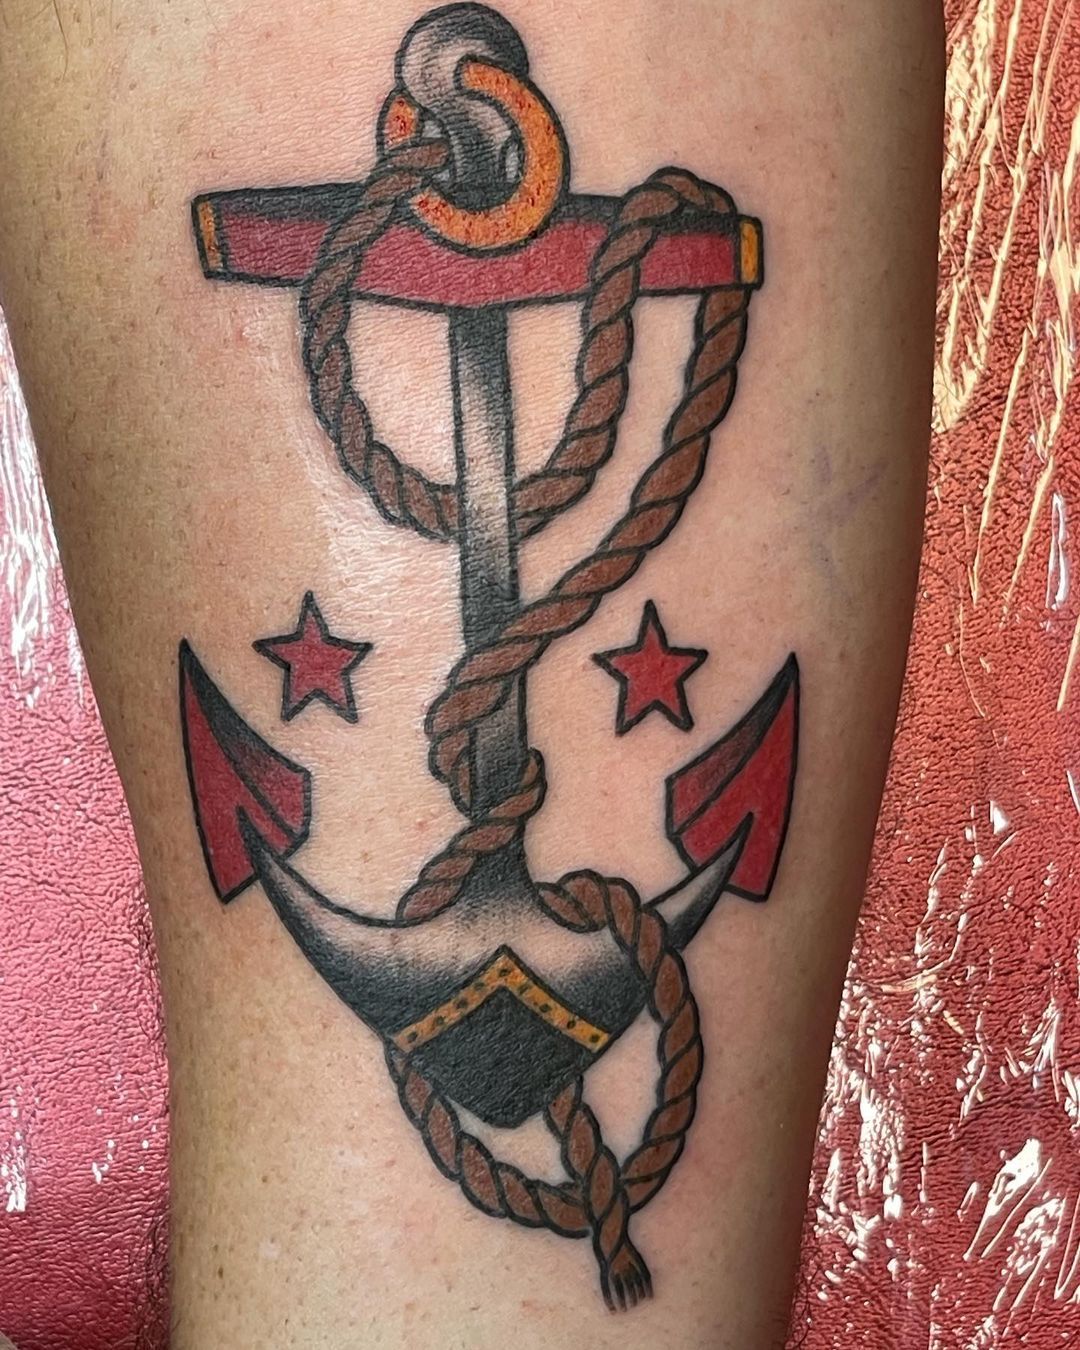 Asclepius Snake Curling Up on Anchor Tattoo